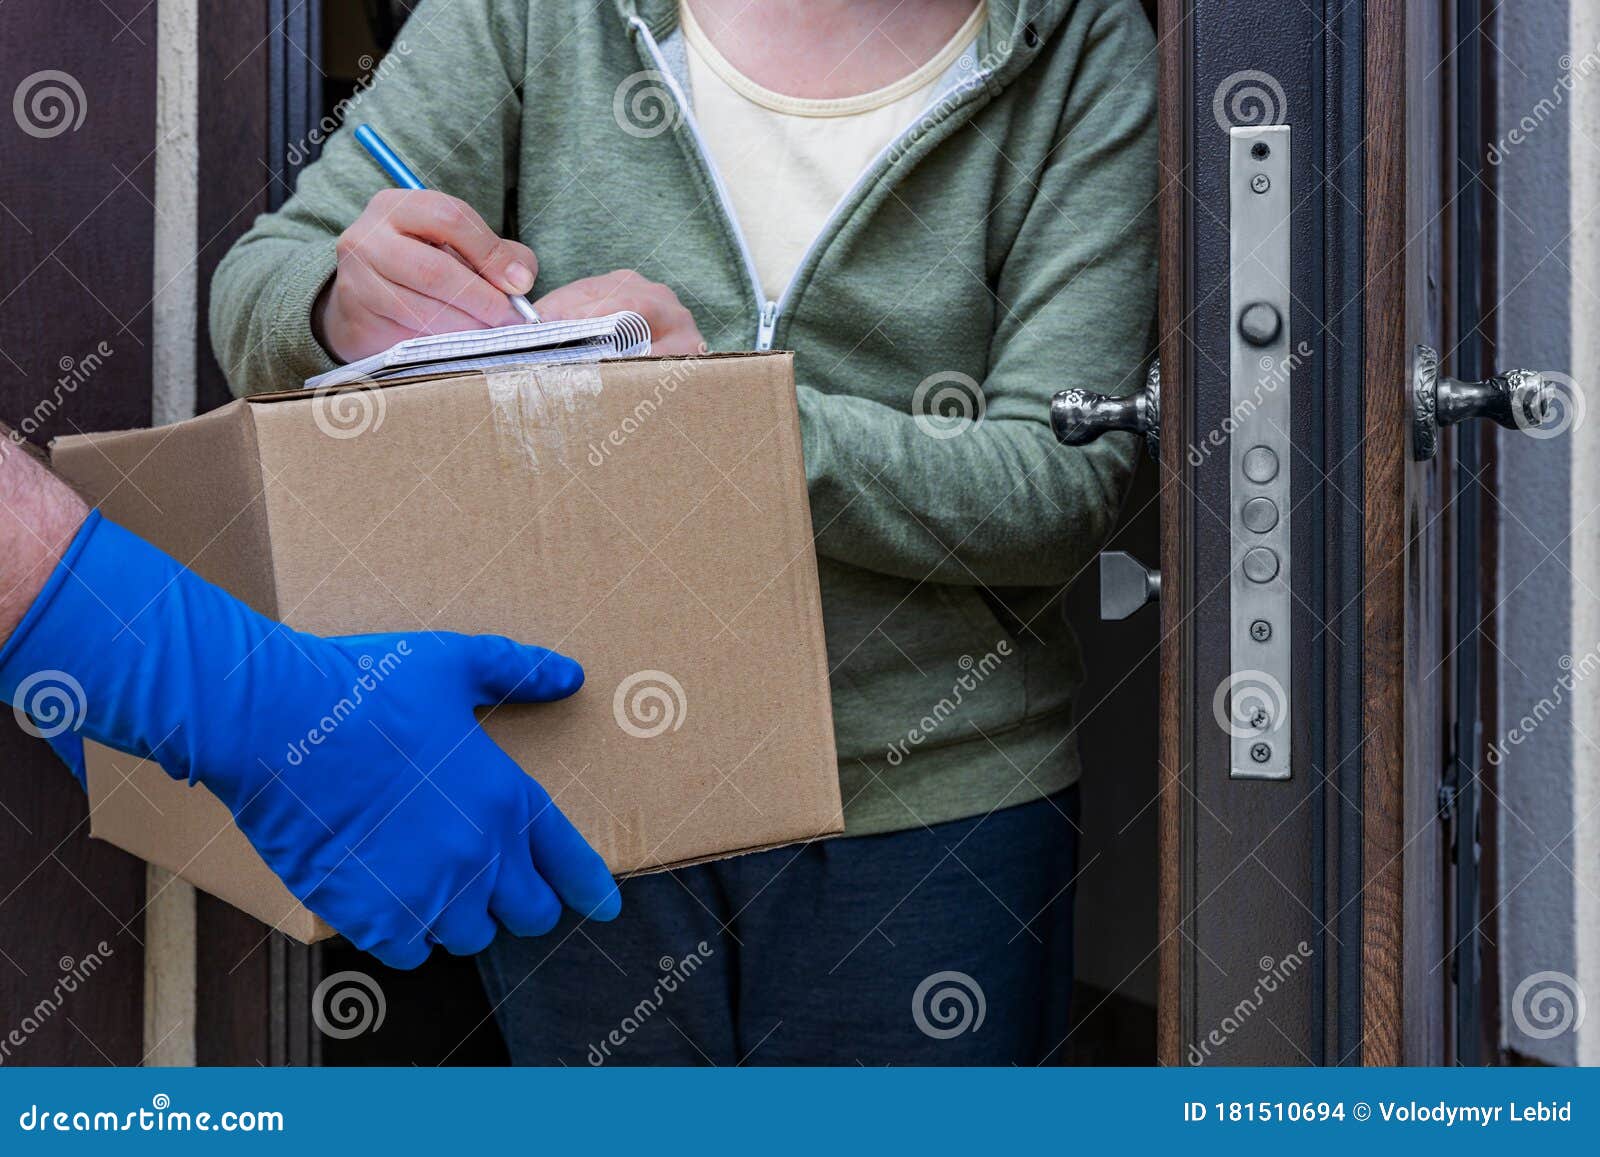 home delivery, a courier in gloves in front of the open door of the house passes the parcel to the woman who signs for